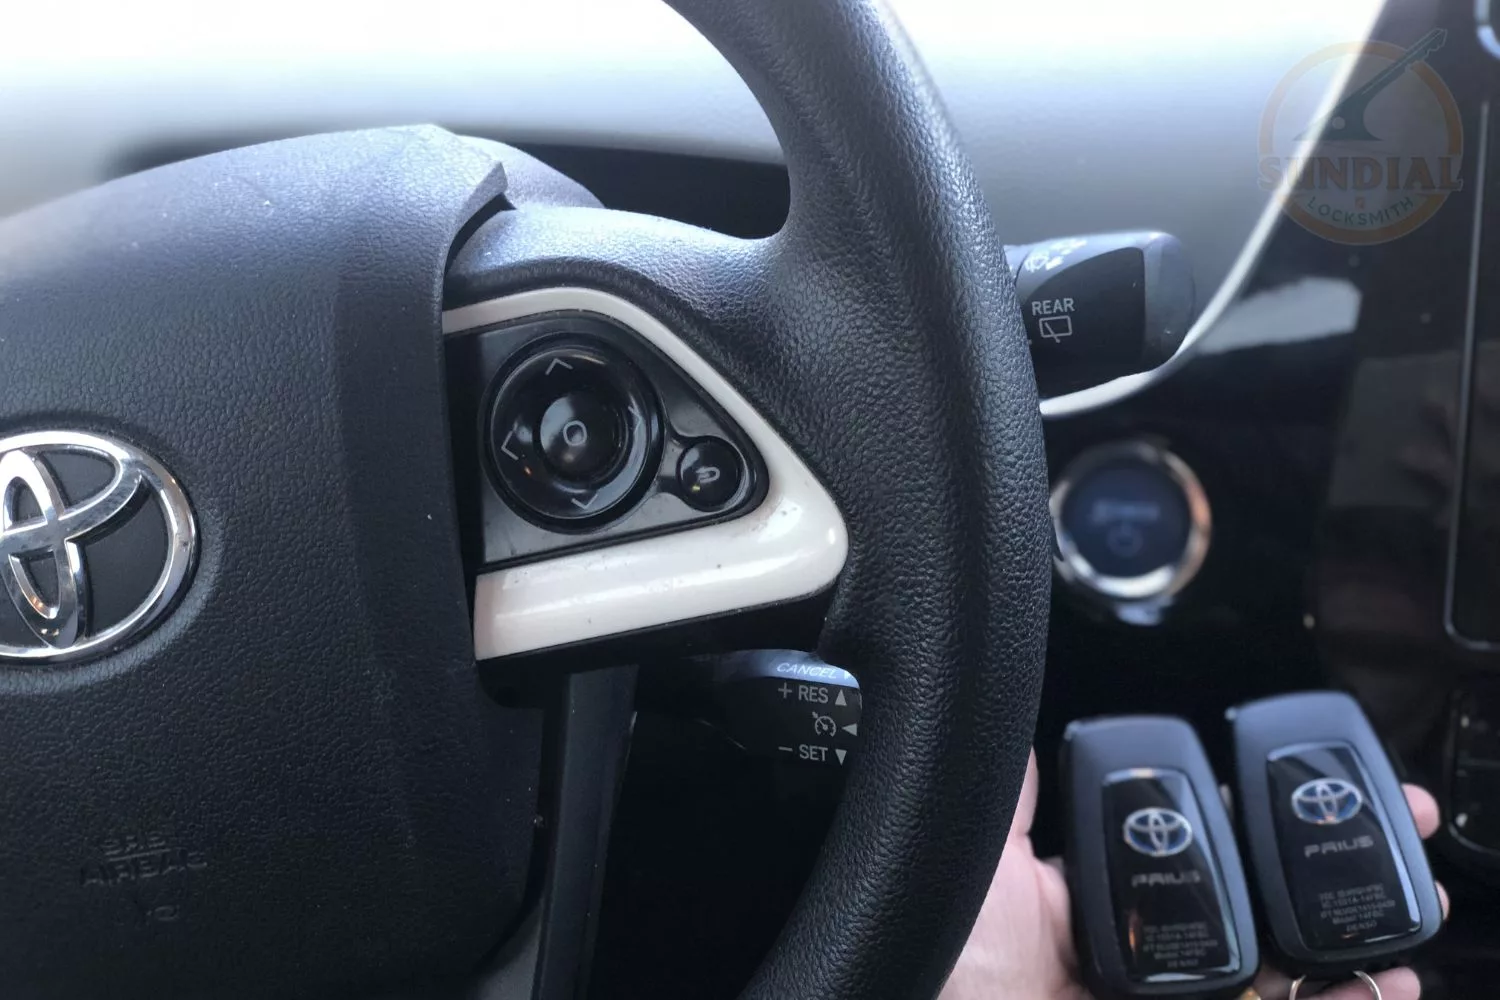 Close-up of a Toyota steering wheel with cruise control buttons and two Toyota Prius key fobs held in front.